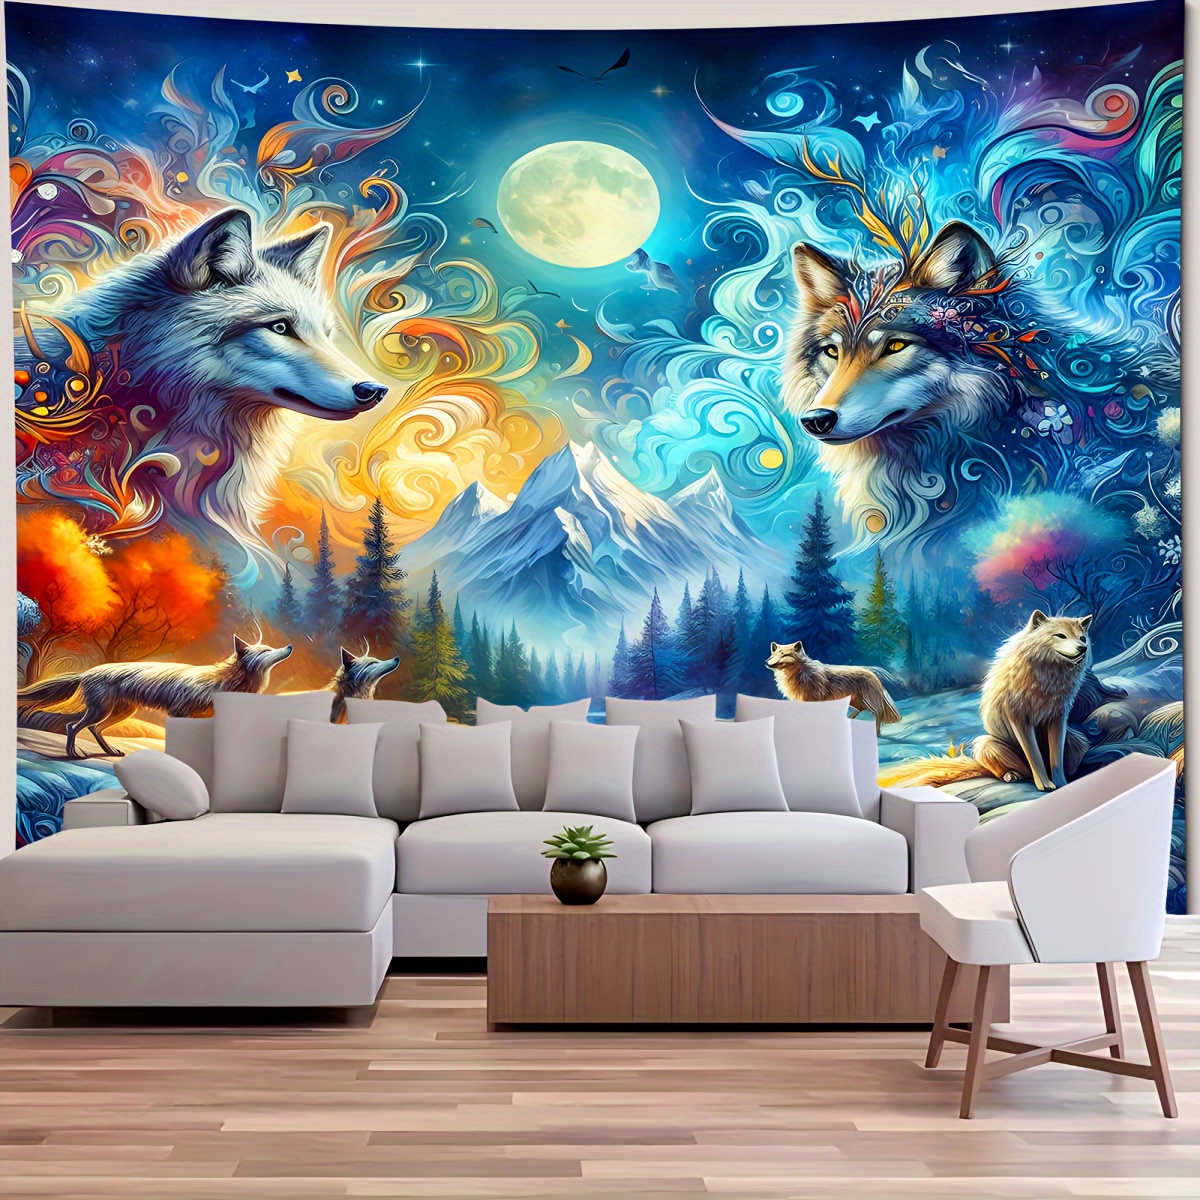 

1pc Wolf Pattern Tapestry, Polyester Tapestry, Wall Hanging For Living Room Bedroom Office, Home Decor Room Decor Party Decor, With Free Installation Package